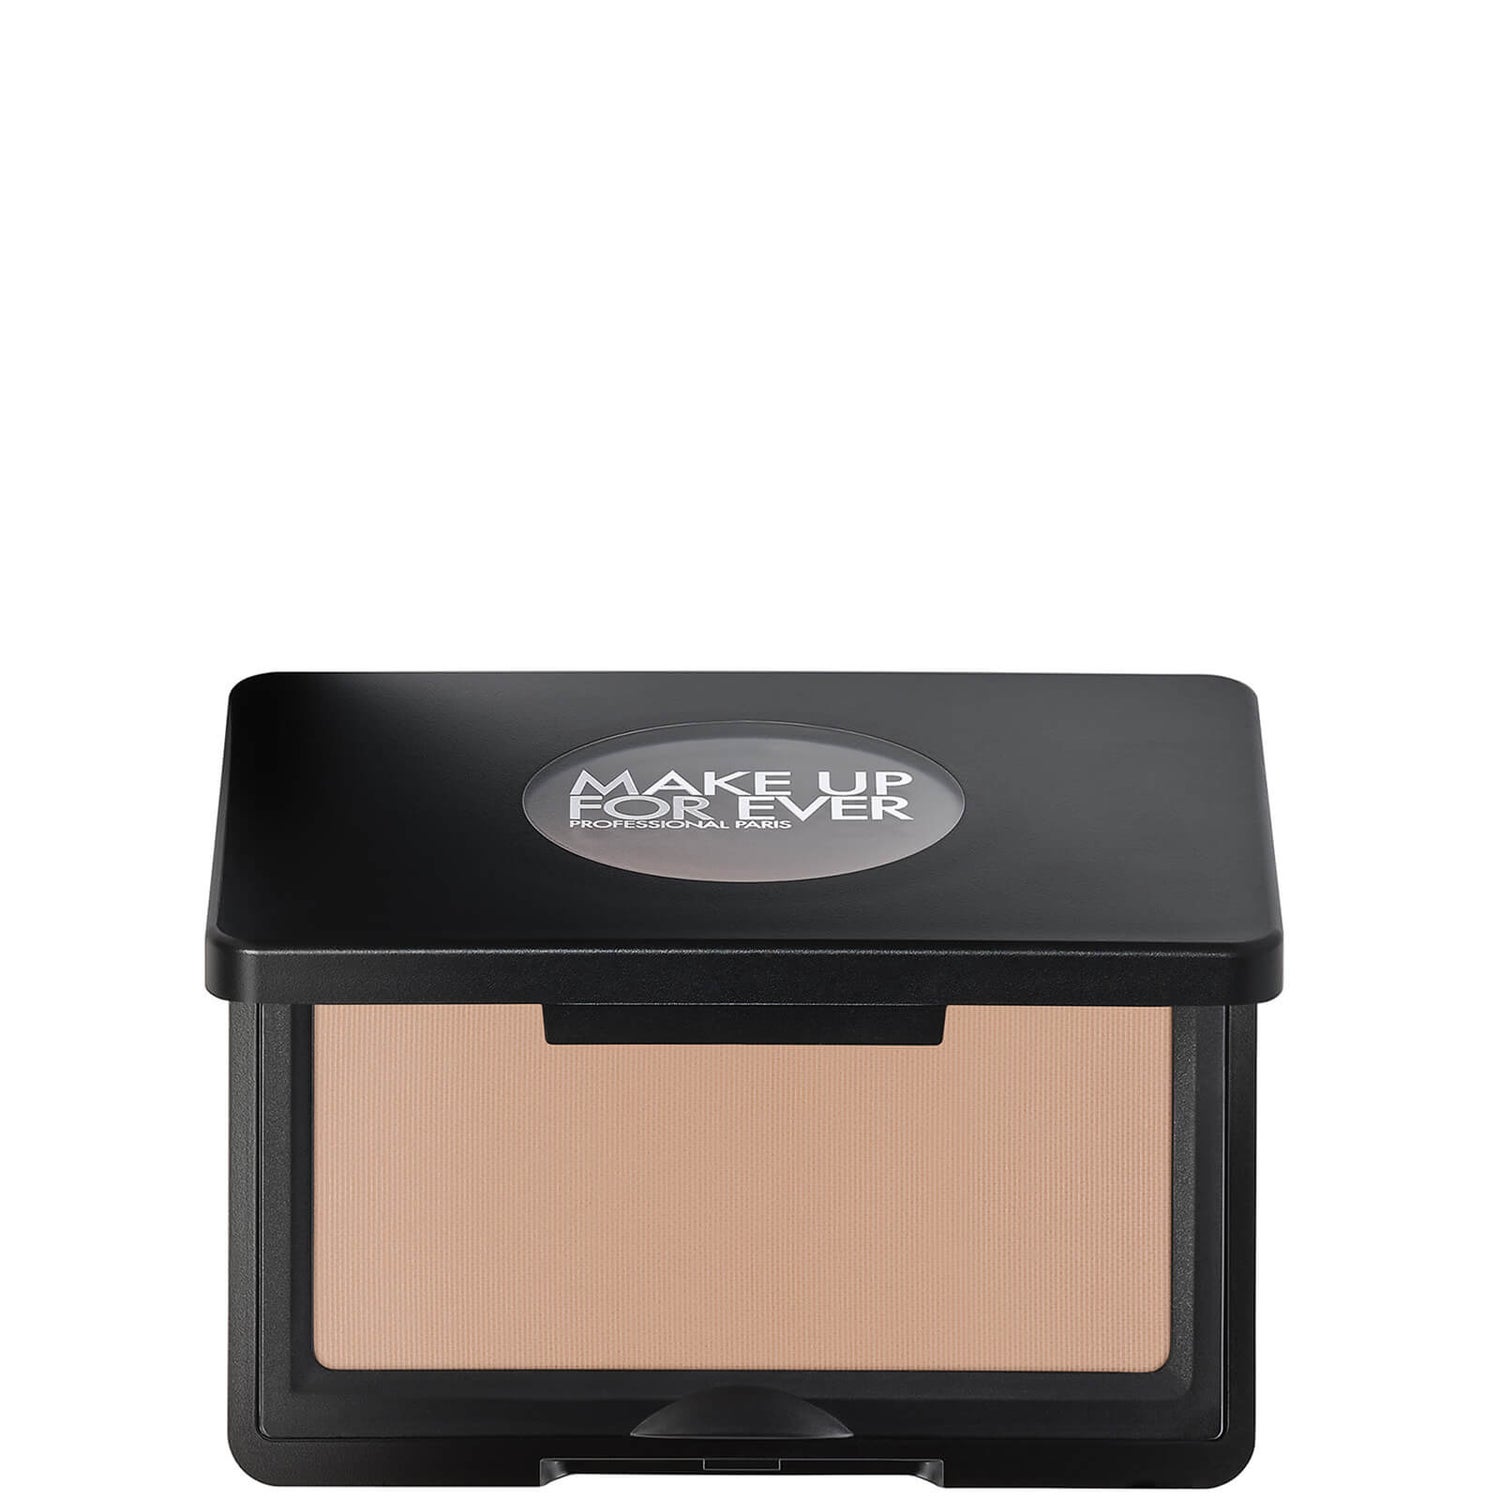 MAKE UP FOR EVER Artist Face Powders Sculpt 4g (Various Shades)